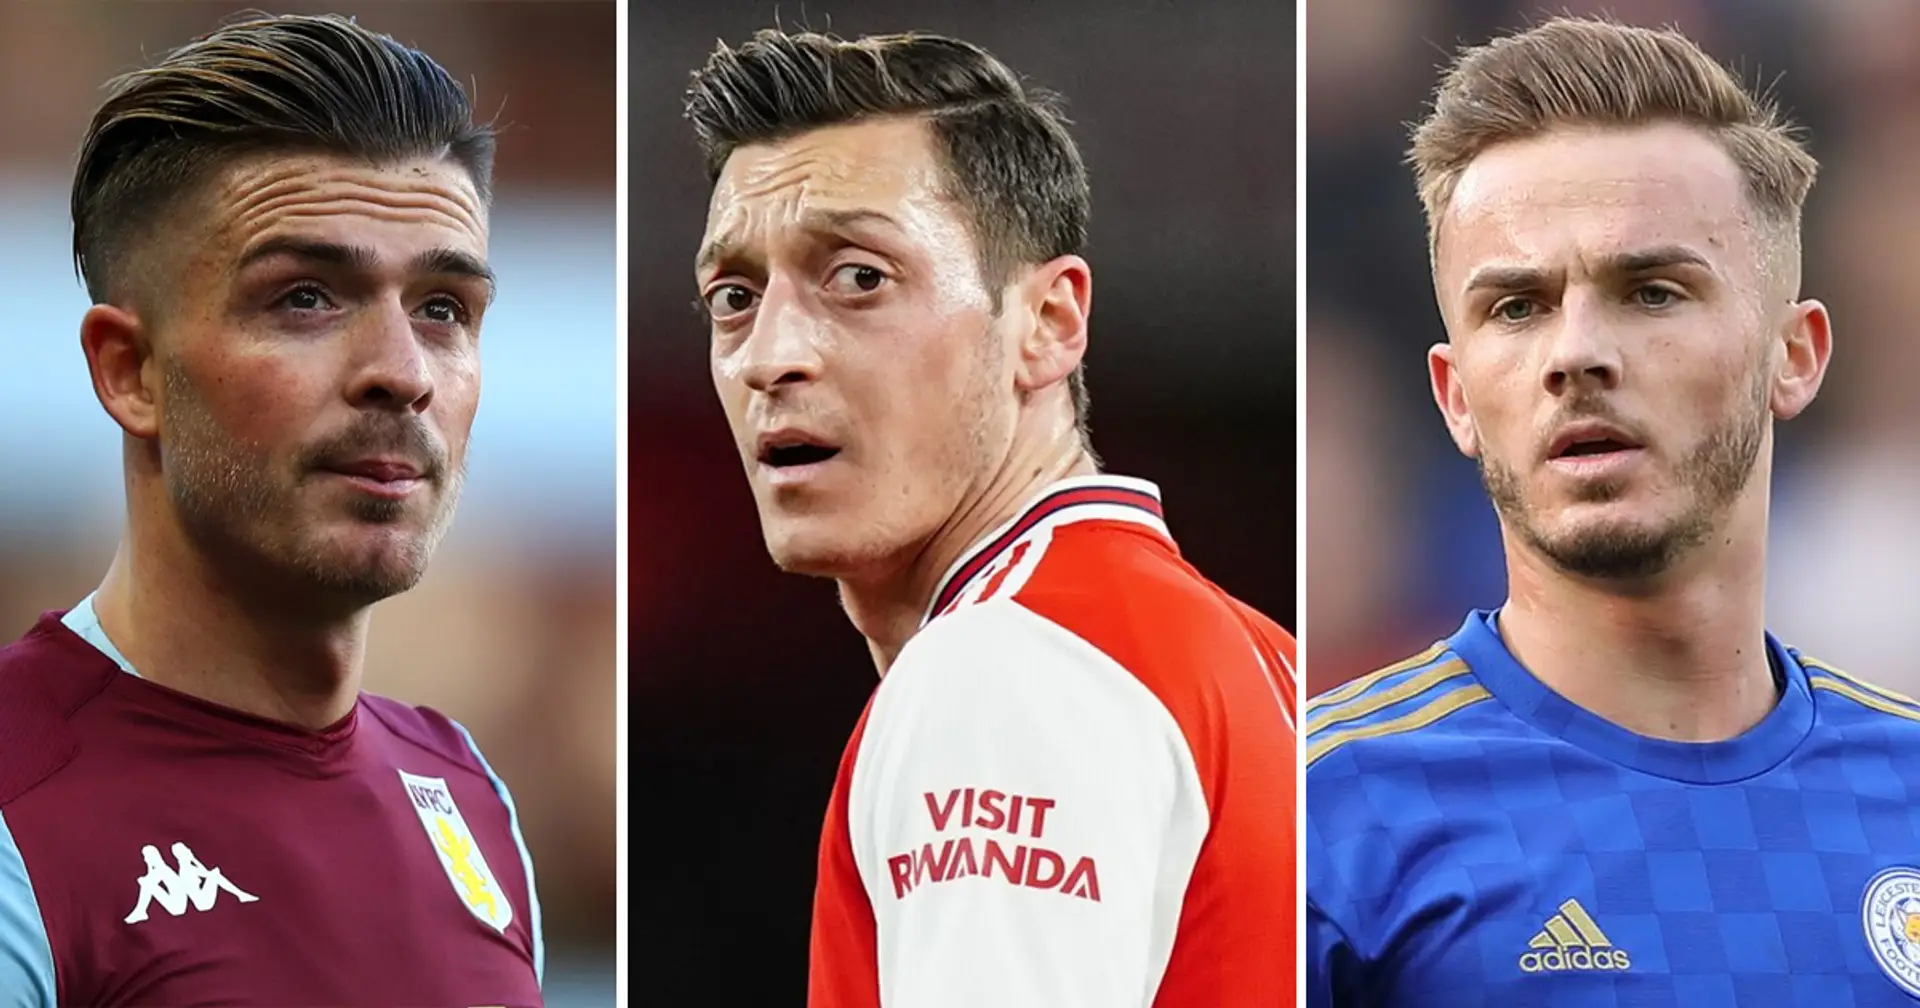 'Arsenal need an all-rounder in midfield': Kevin Campbell urges Gunners to replace Mesut Ozil with Jack Grealish or James Maddison